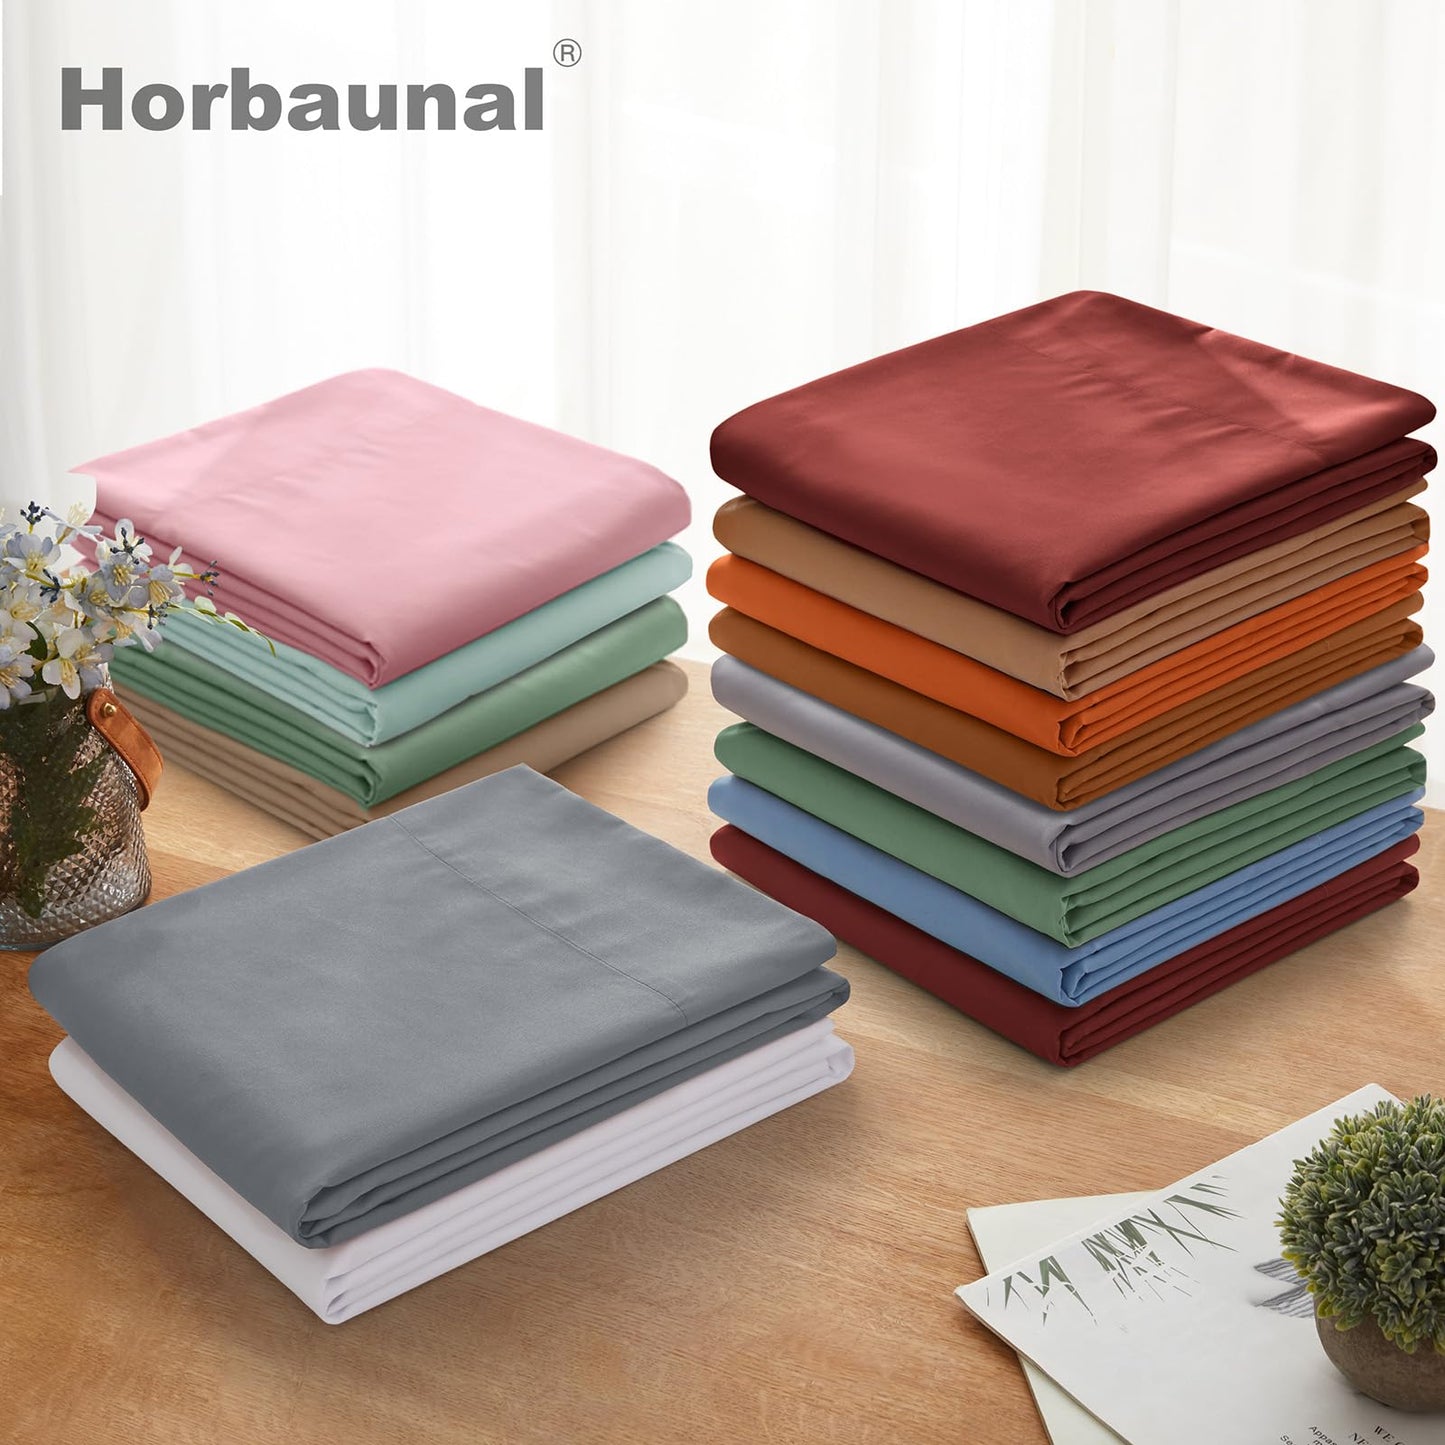 Horbaunal 2 Pack Full Flat Bed Sheets Only - 1800 Thread Count Microfiber Silver Grey Flat Sheet Only - Wrinkle Free & Ultra Soft Bed Top Sheets Full Size